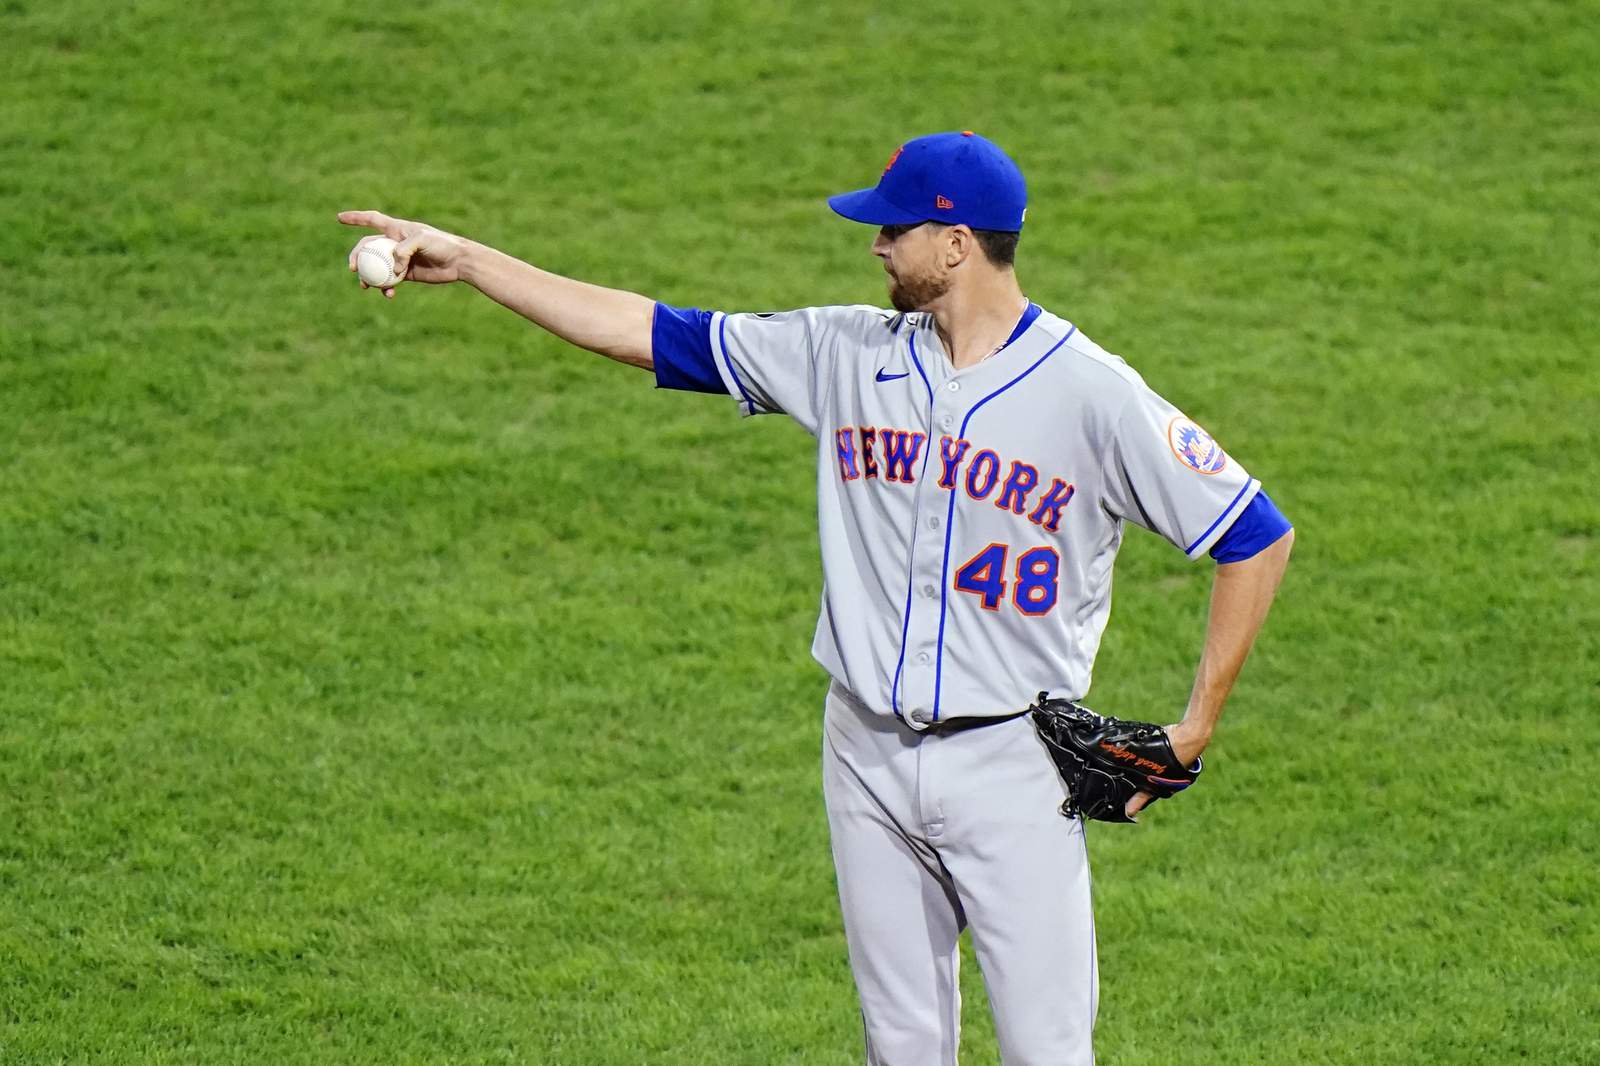 DeGrom exits with hamstring spasm, Mets rally past Phils 5-4